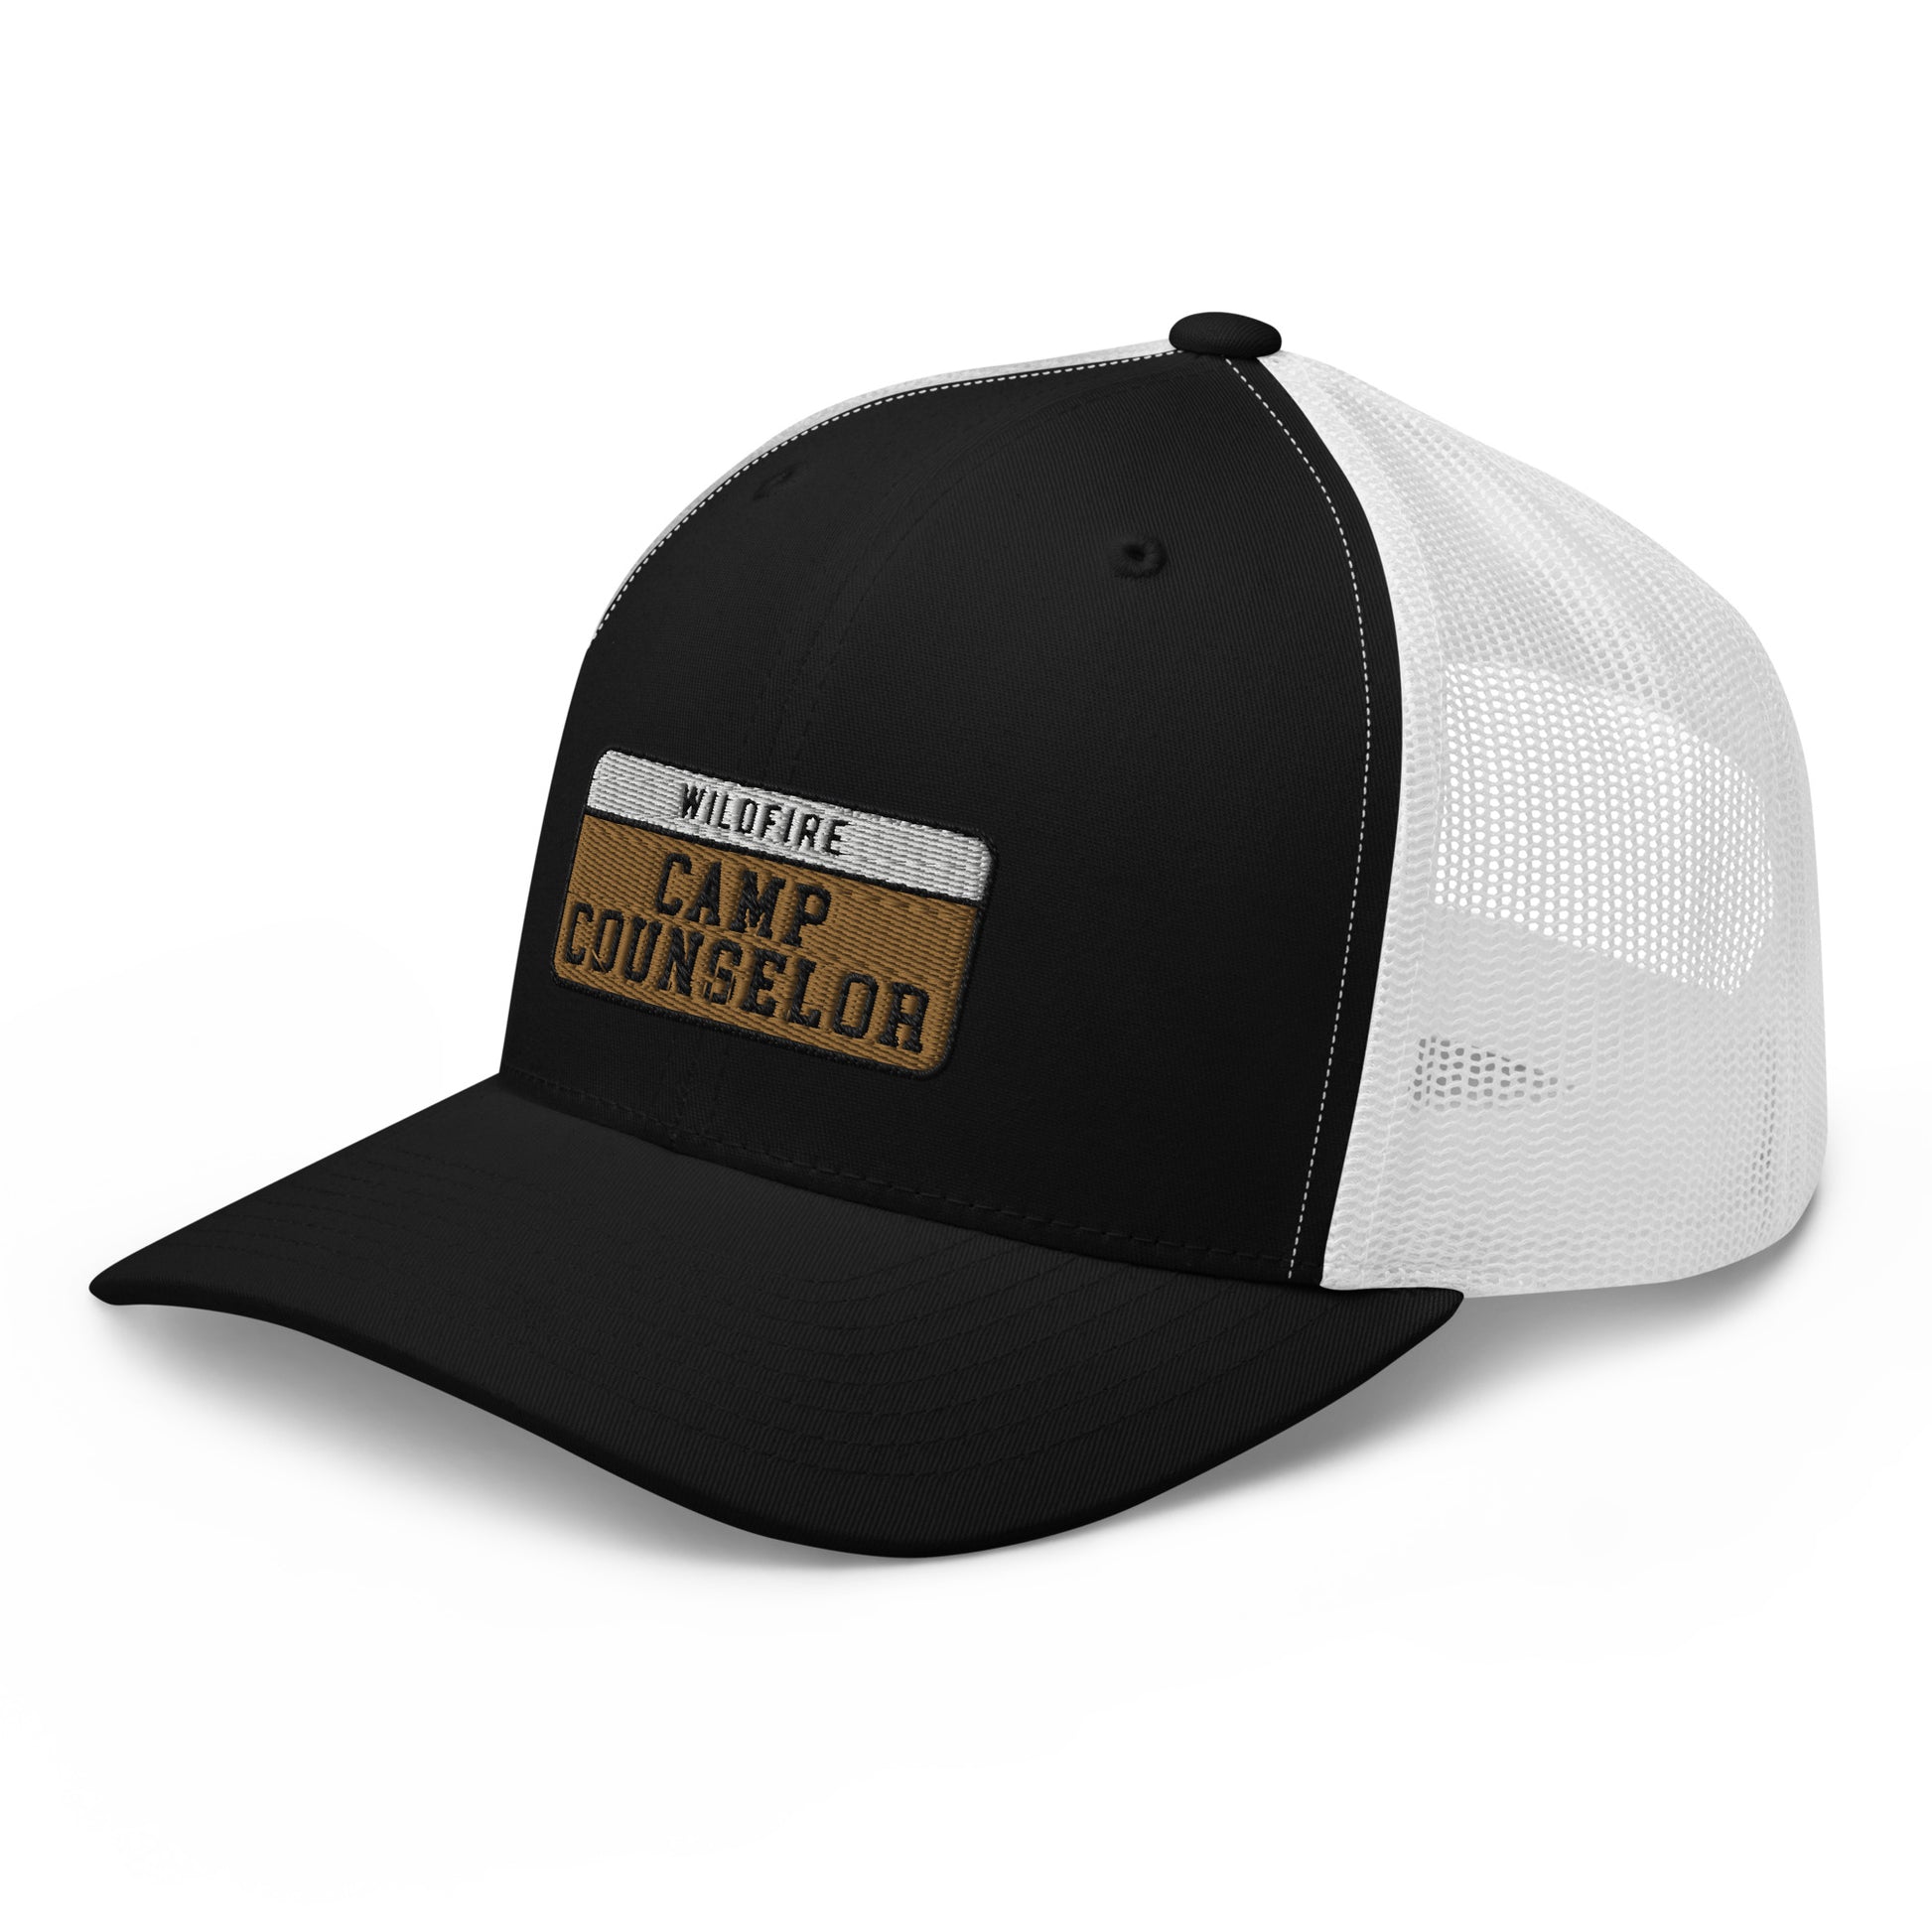 Wildfire Cigars embroidered Camp Counselor retro trucker in black and white facing the front left